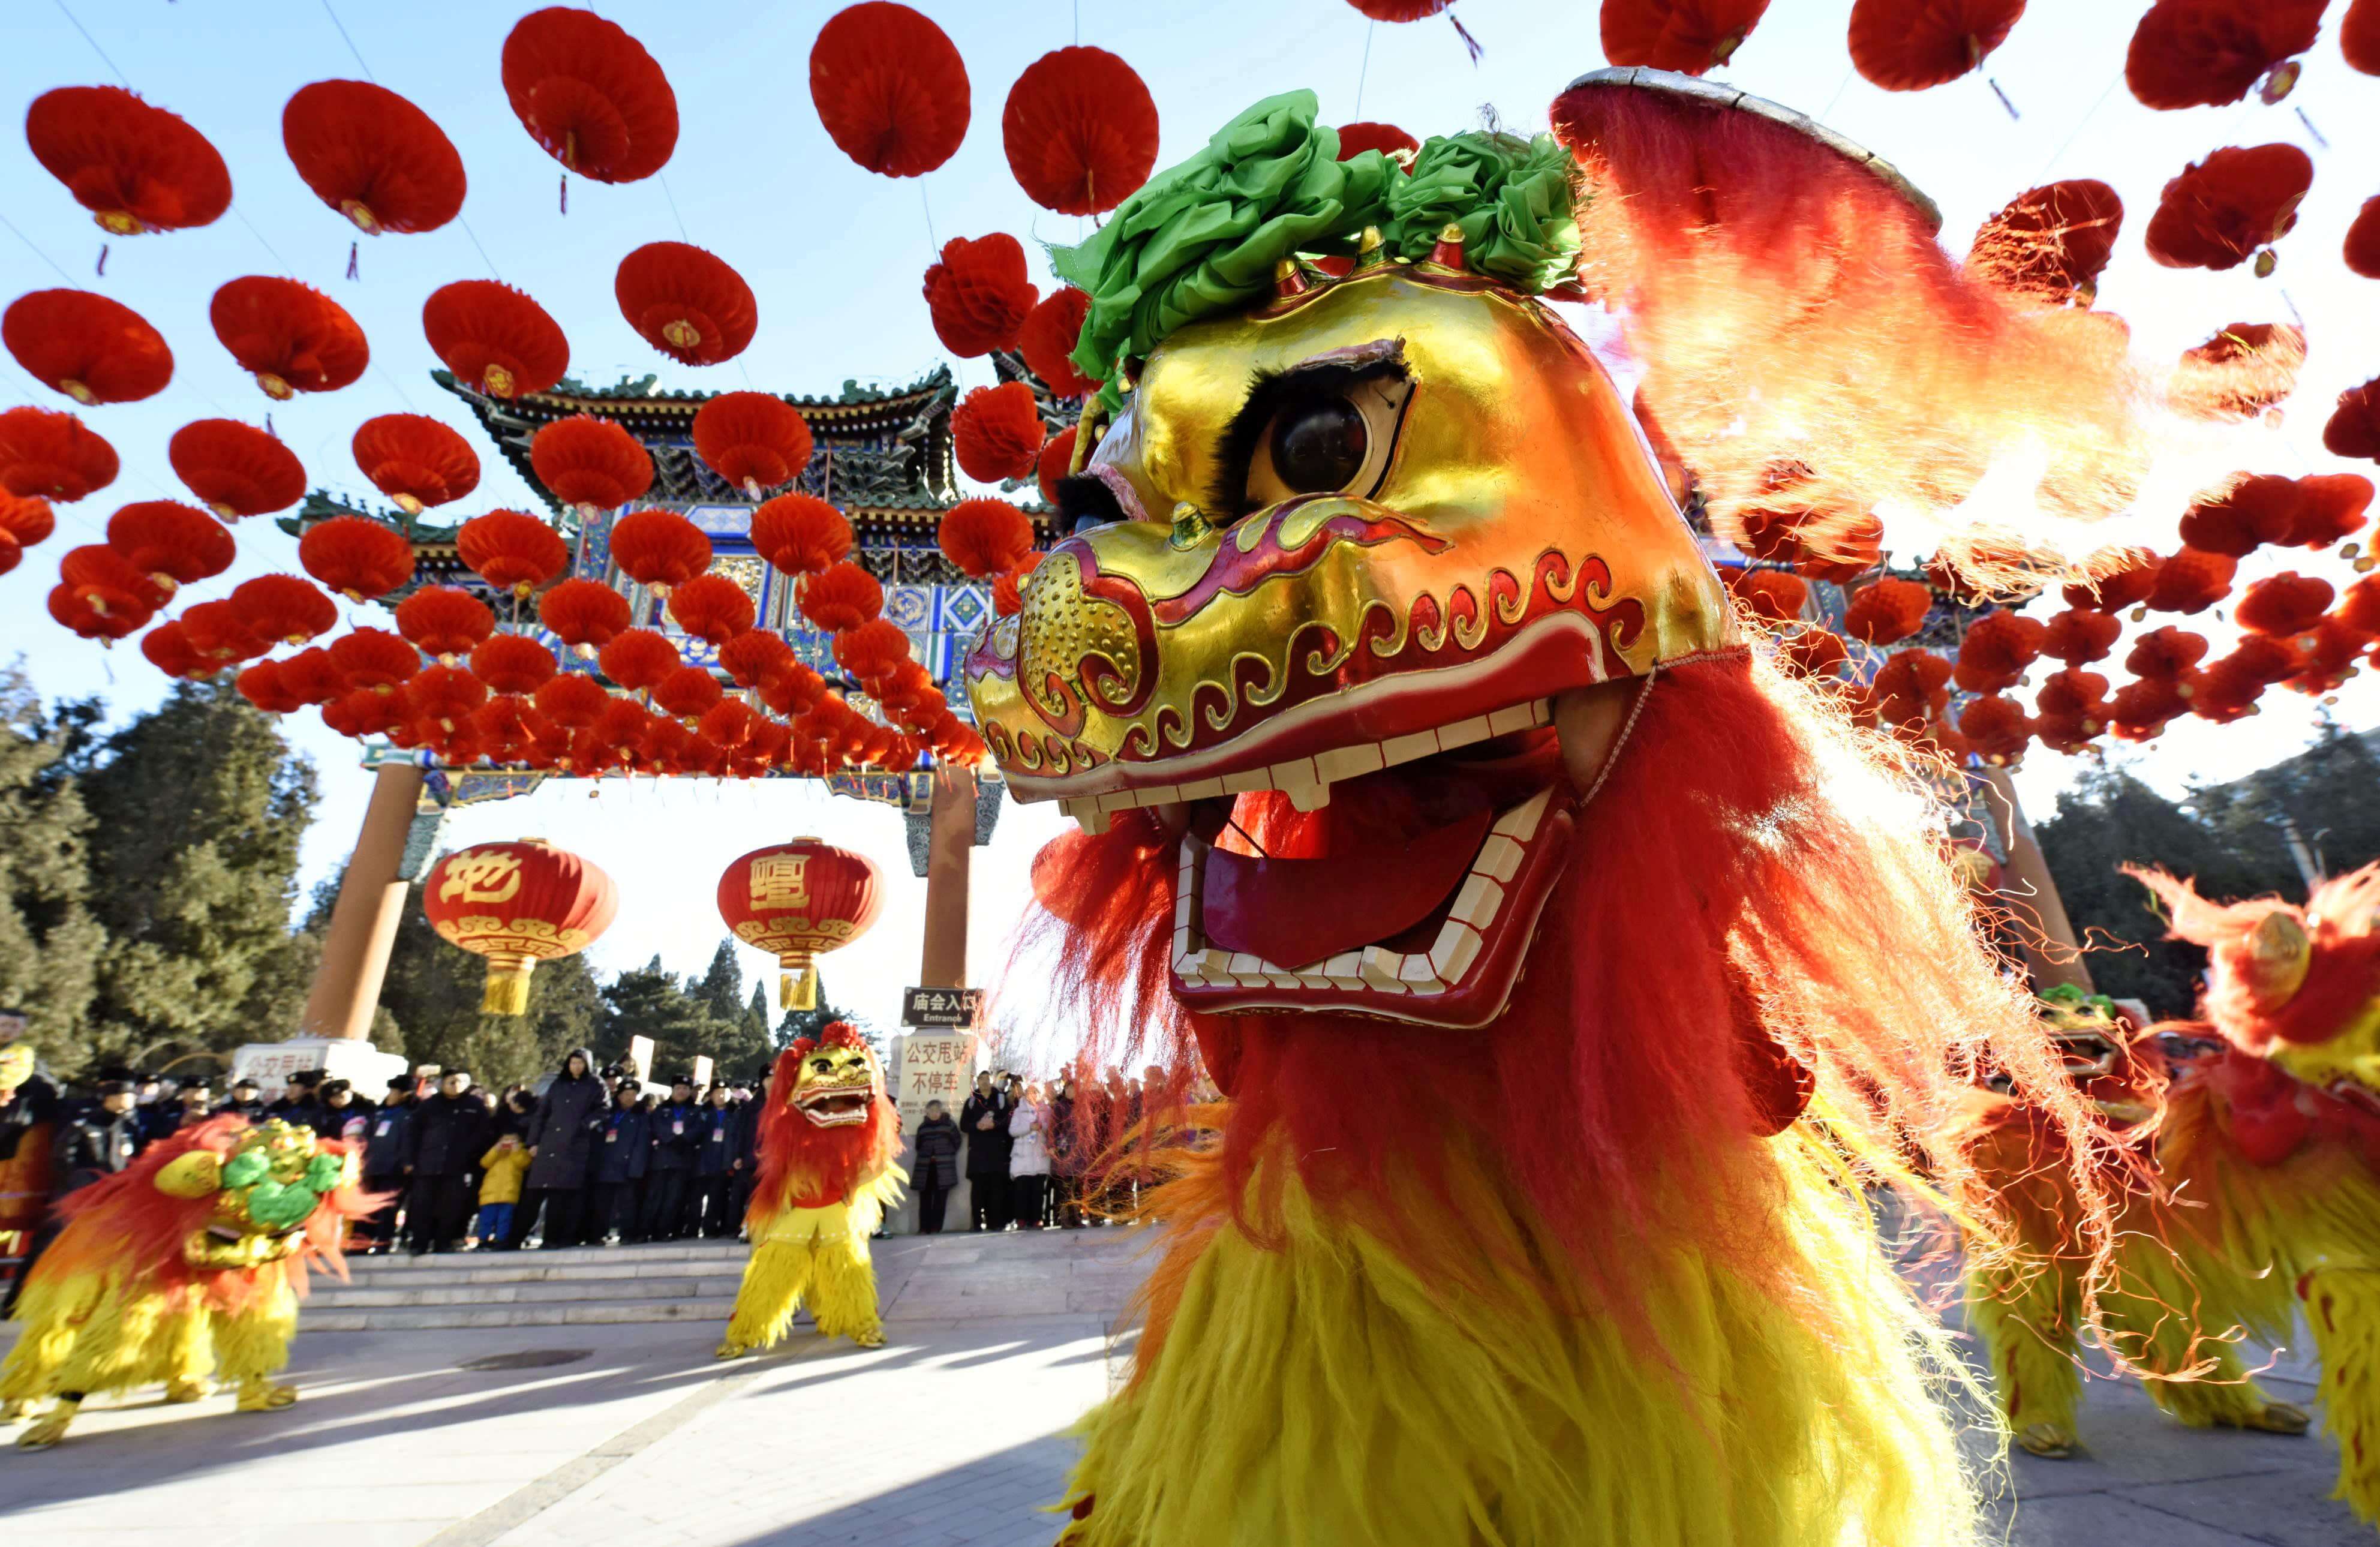 Chinese New Year likely to see record consumer spending